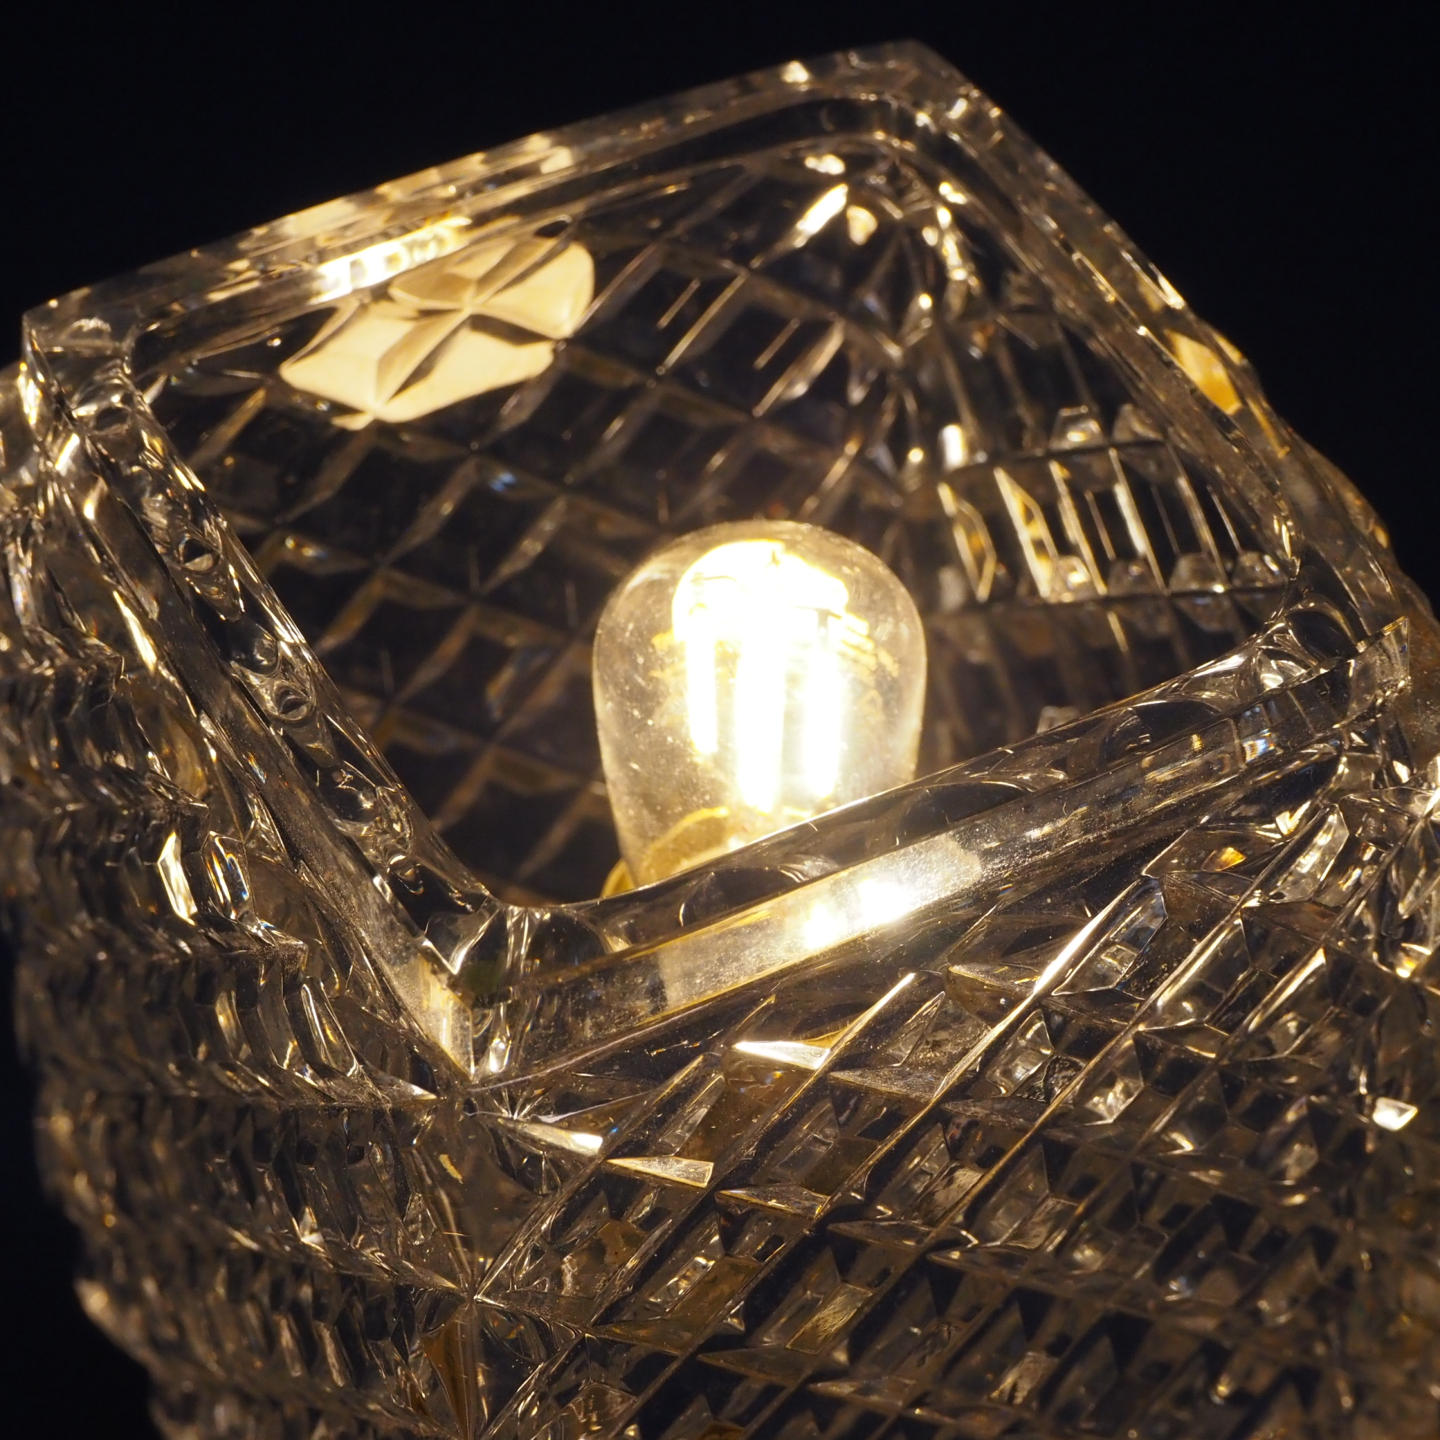 Table light 'Daisy' in brass and with handcrafted textured glass diffuser